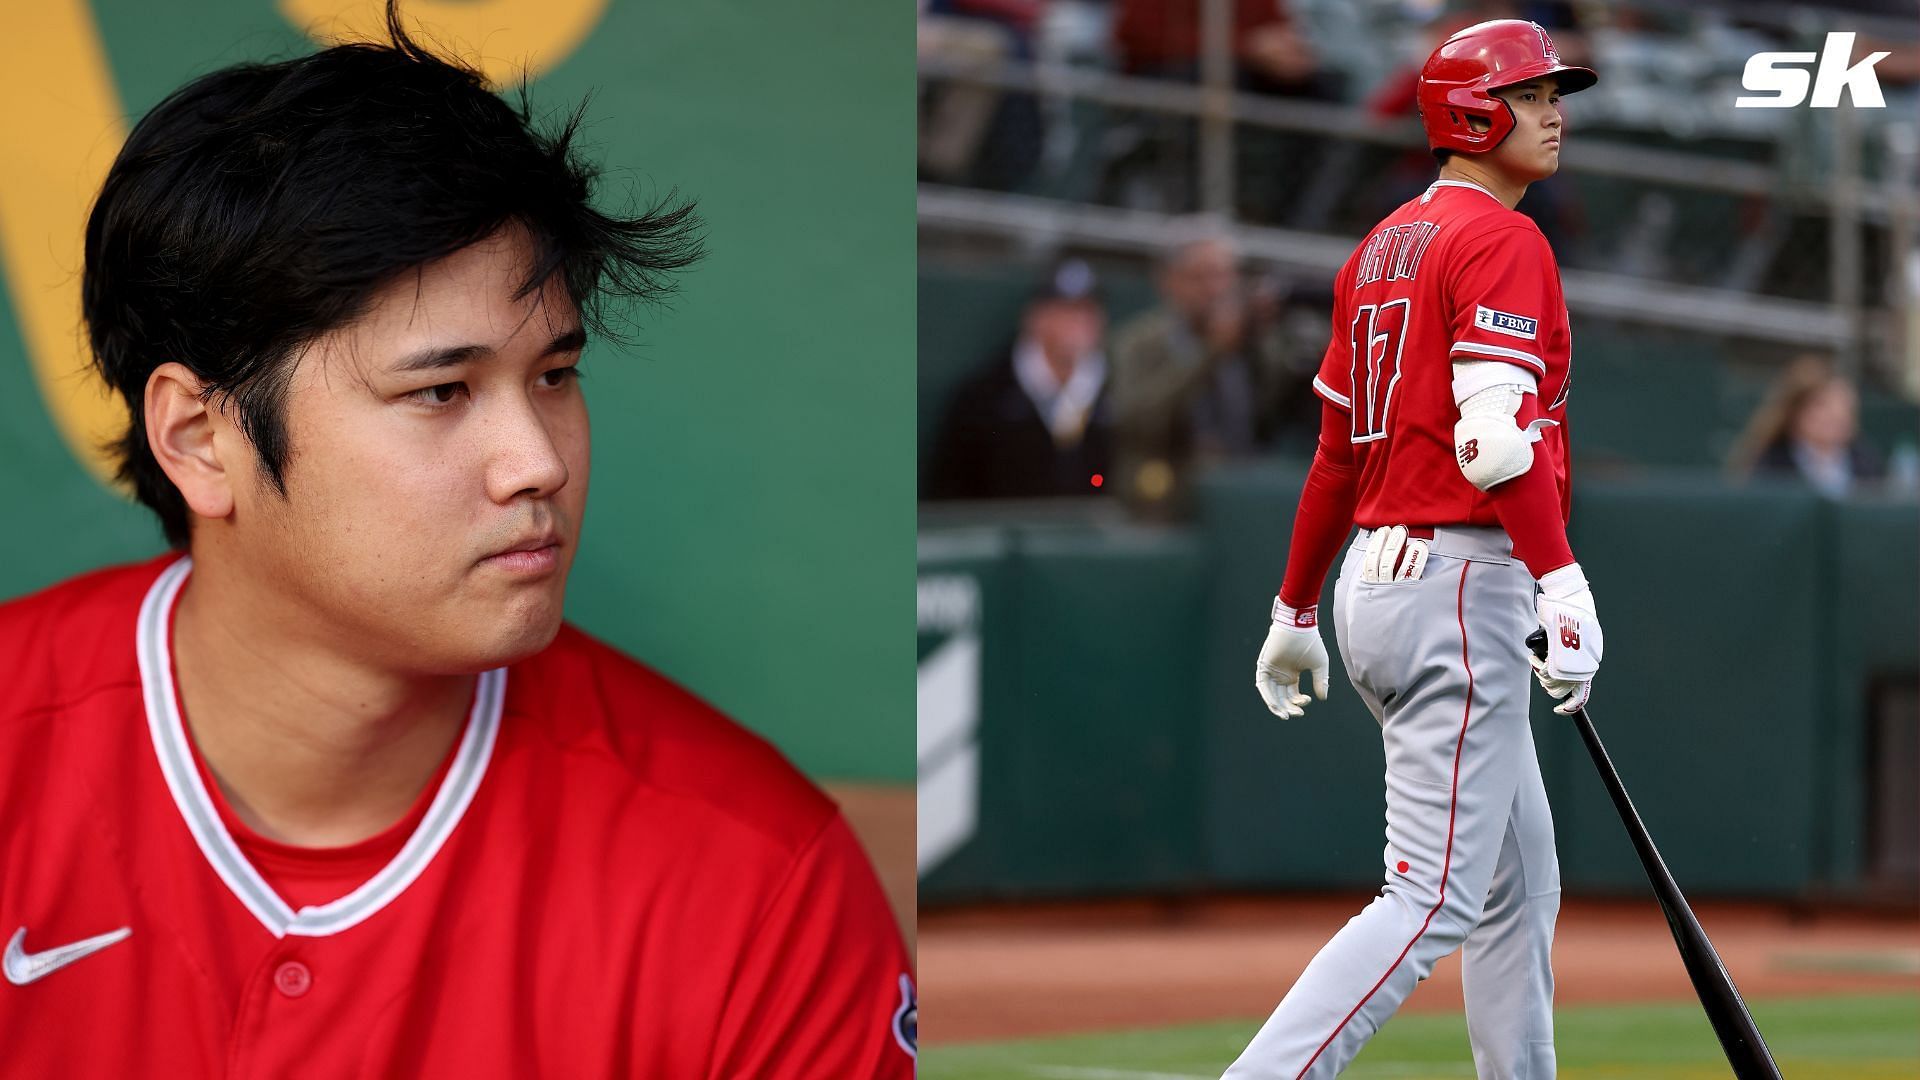 New information from a top analyst suggests that the Texas Rangers are on Shohei Ohtani